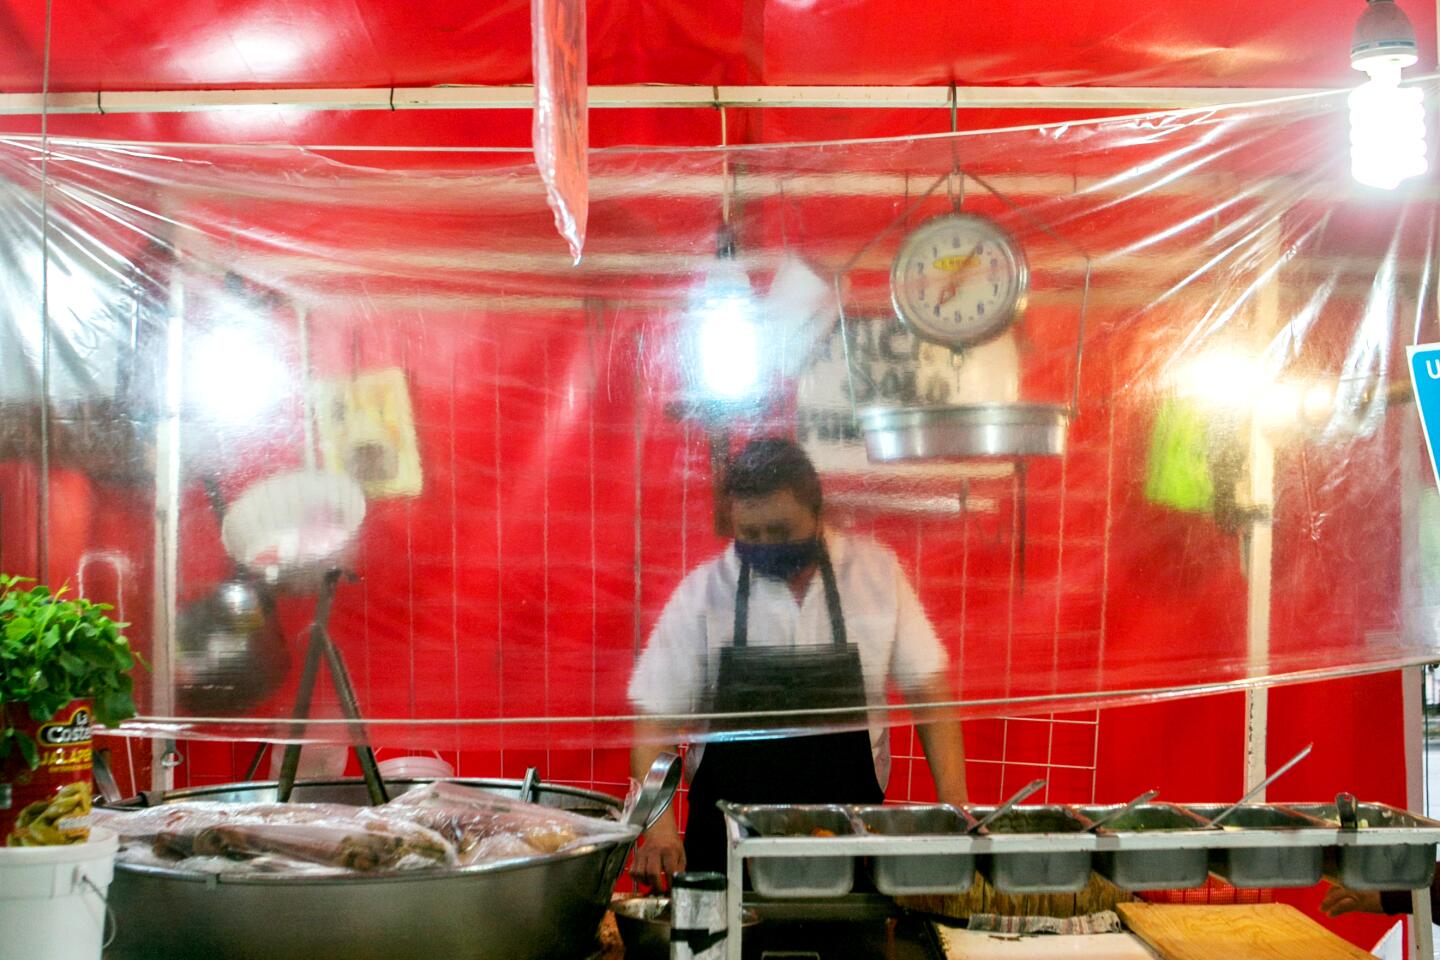 "We haven't had very many customers lately," says Javier Hernandez of the carnitas stand he runs in Mexico City.